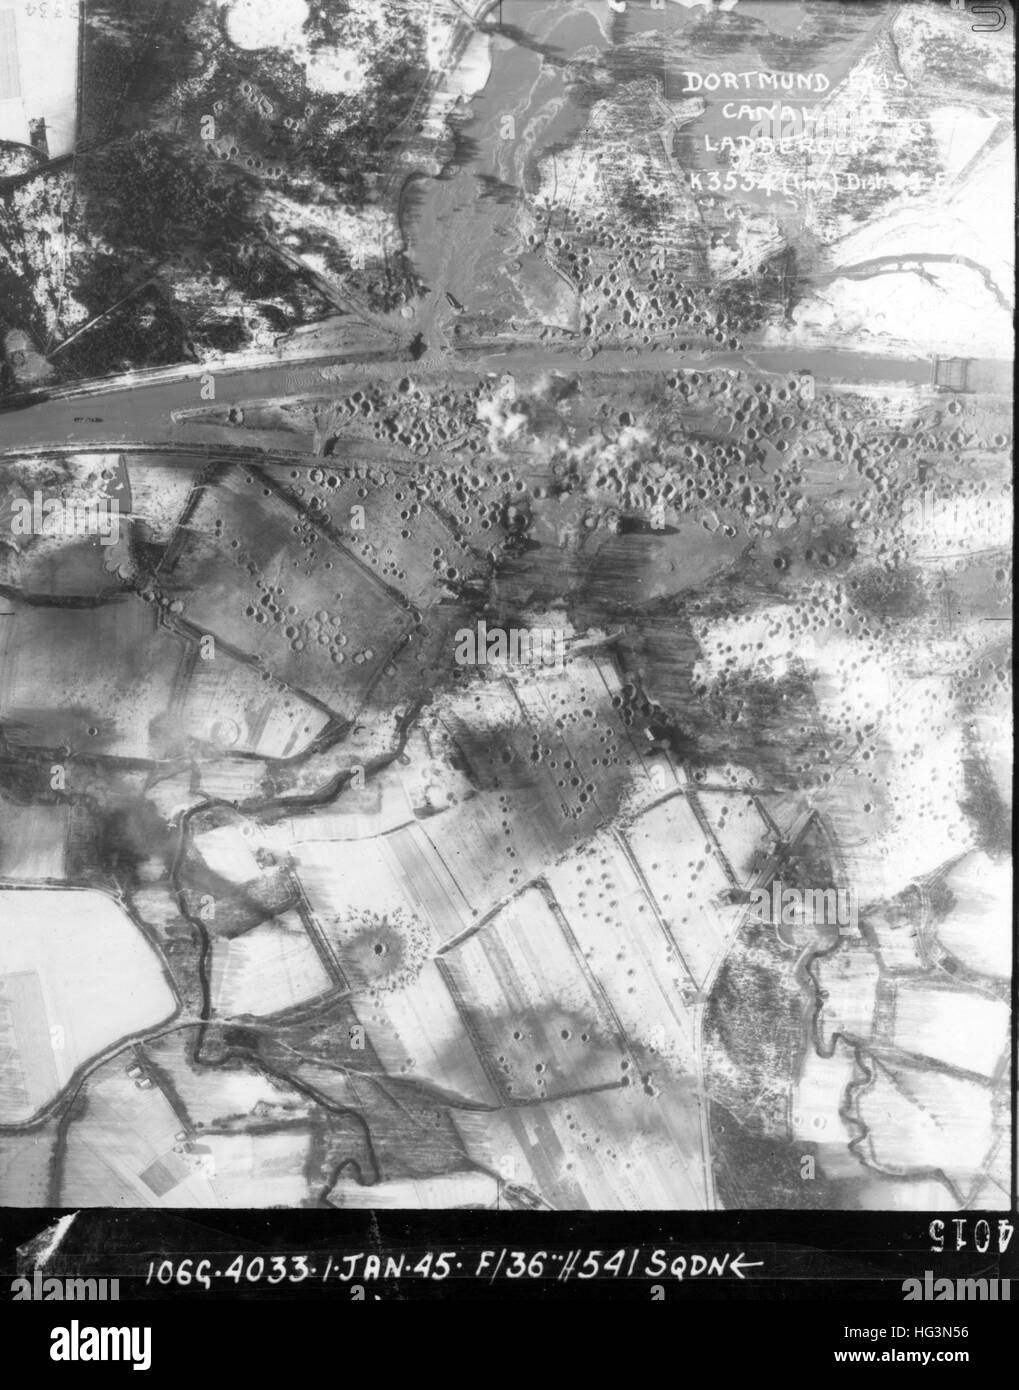 DORTMUND-EMS CANAL, Germany. Aerial reconnaissance photo by 541 Squadron RAF on 1 January 1945 showing bomb damage to the bridge at Ladbergen over the Dortmund-Ems Canal Stock Photo